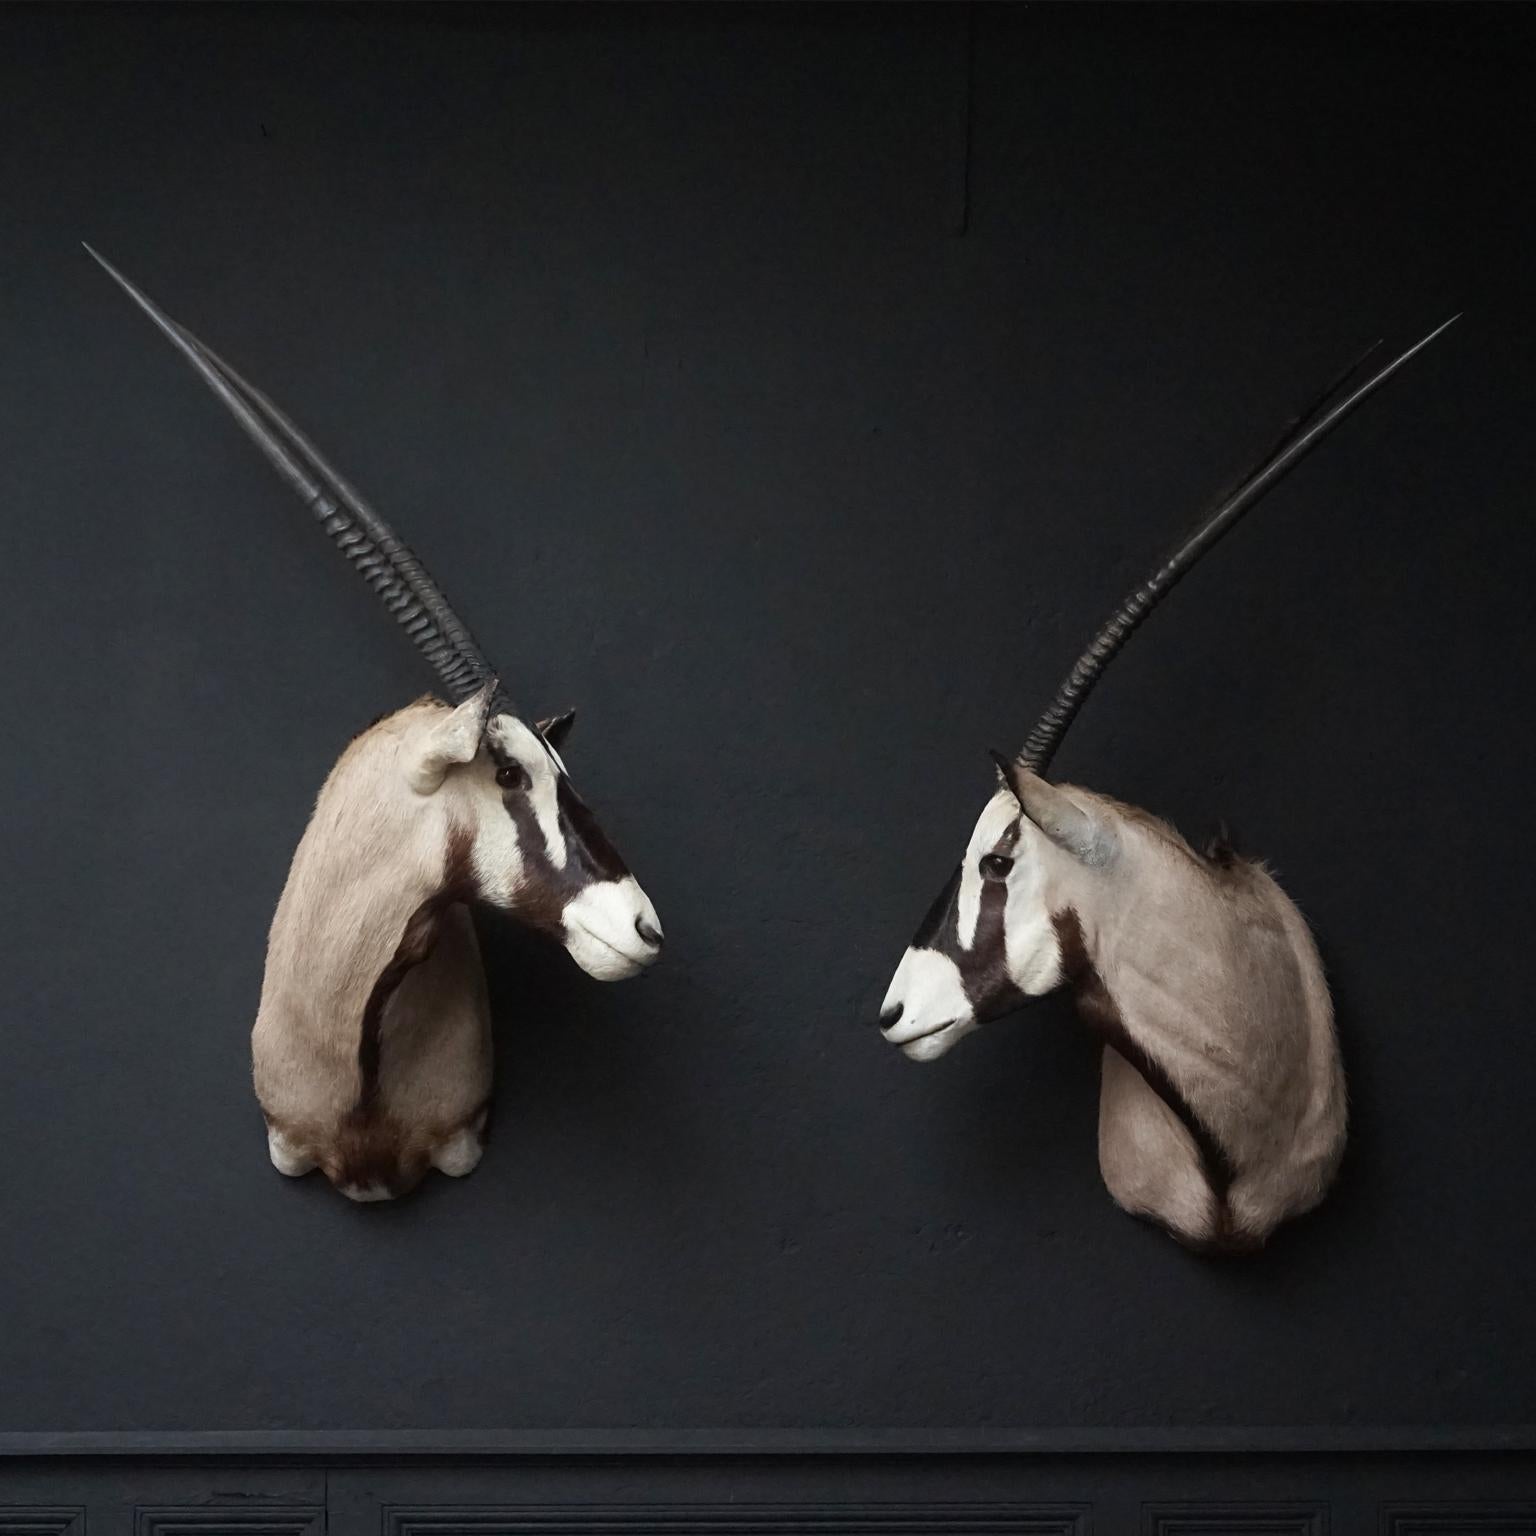 Very nicely mounted vintage set of South African Oryx Antelope's shoulder mounts, they are also known as Gemsbok or Oryx Gazella.

These South African gracious animals have spectacular horns and Oryx are considered by some to be the most handsome